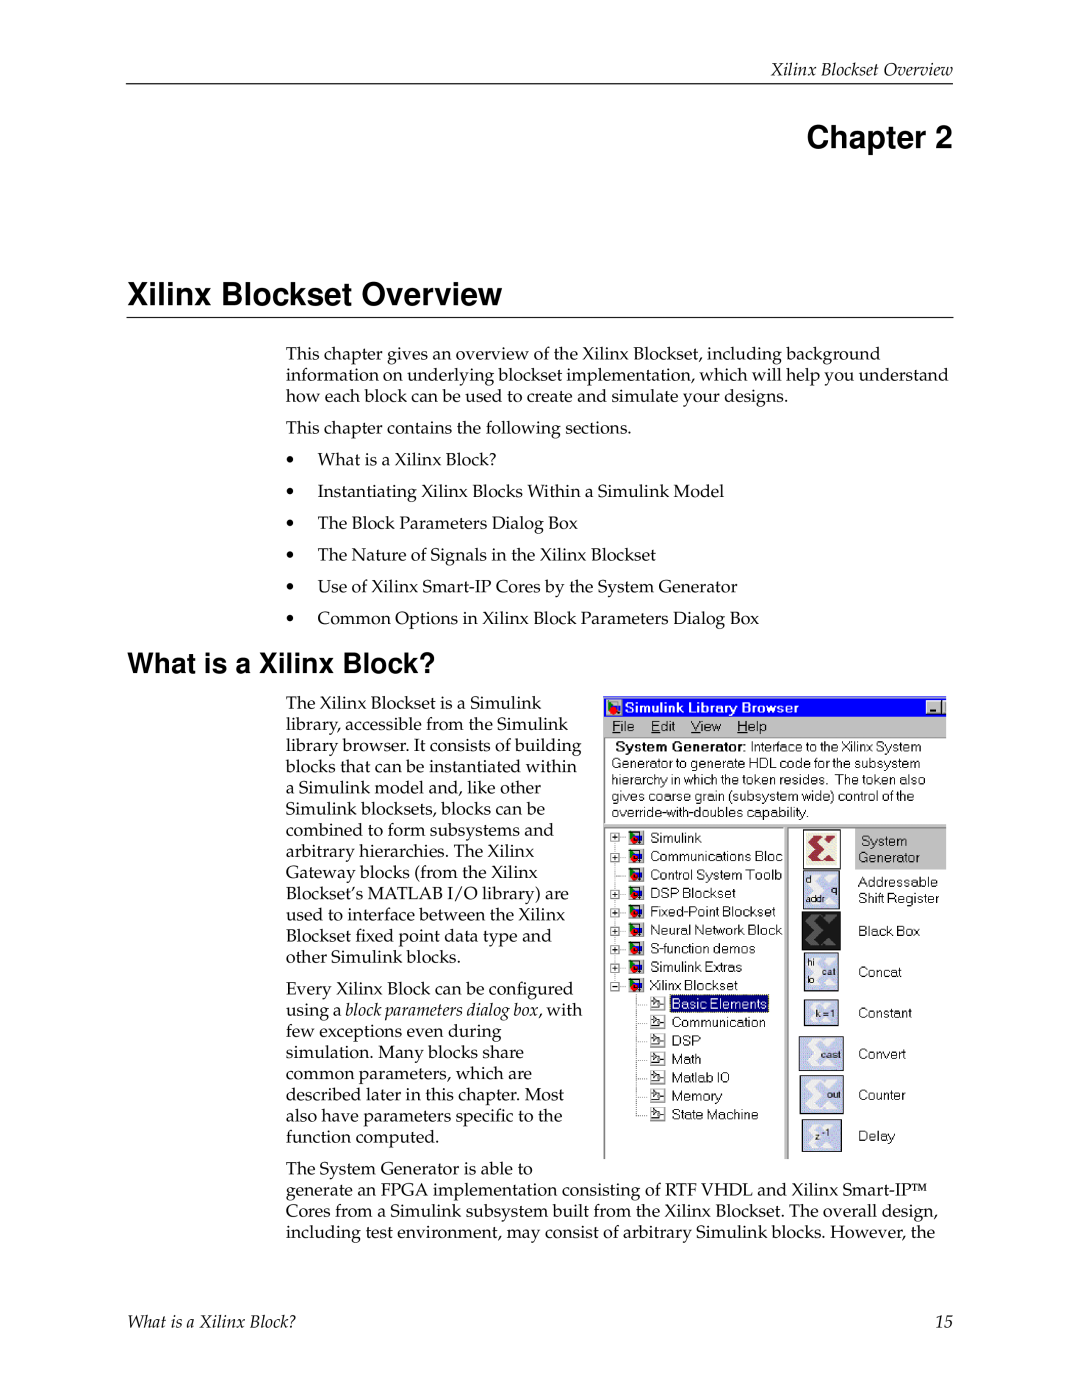 Xilinx V2.1 manual Chapter Xilinx Blockset Overview, What is a Xilinx Block? 